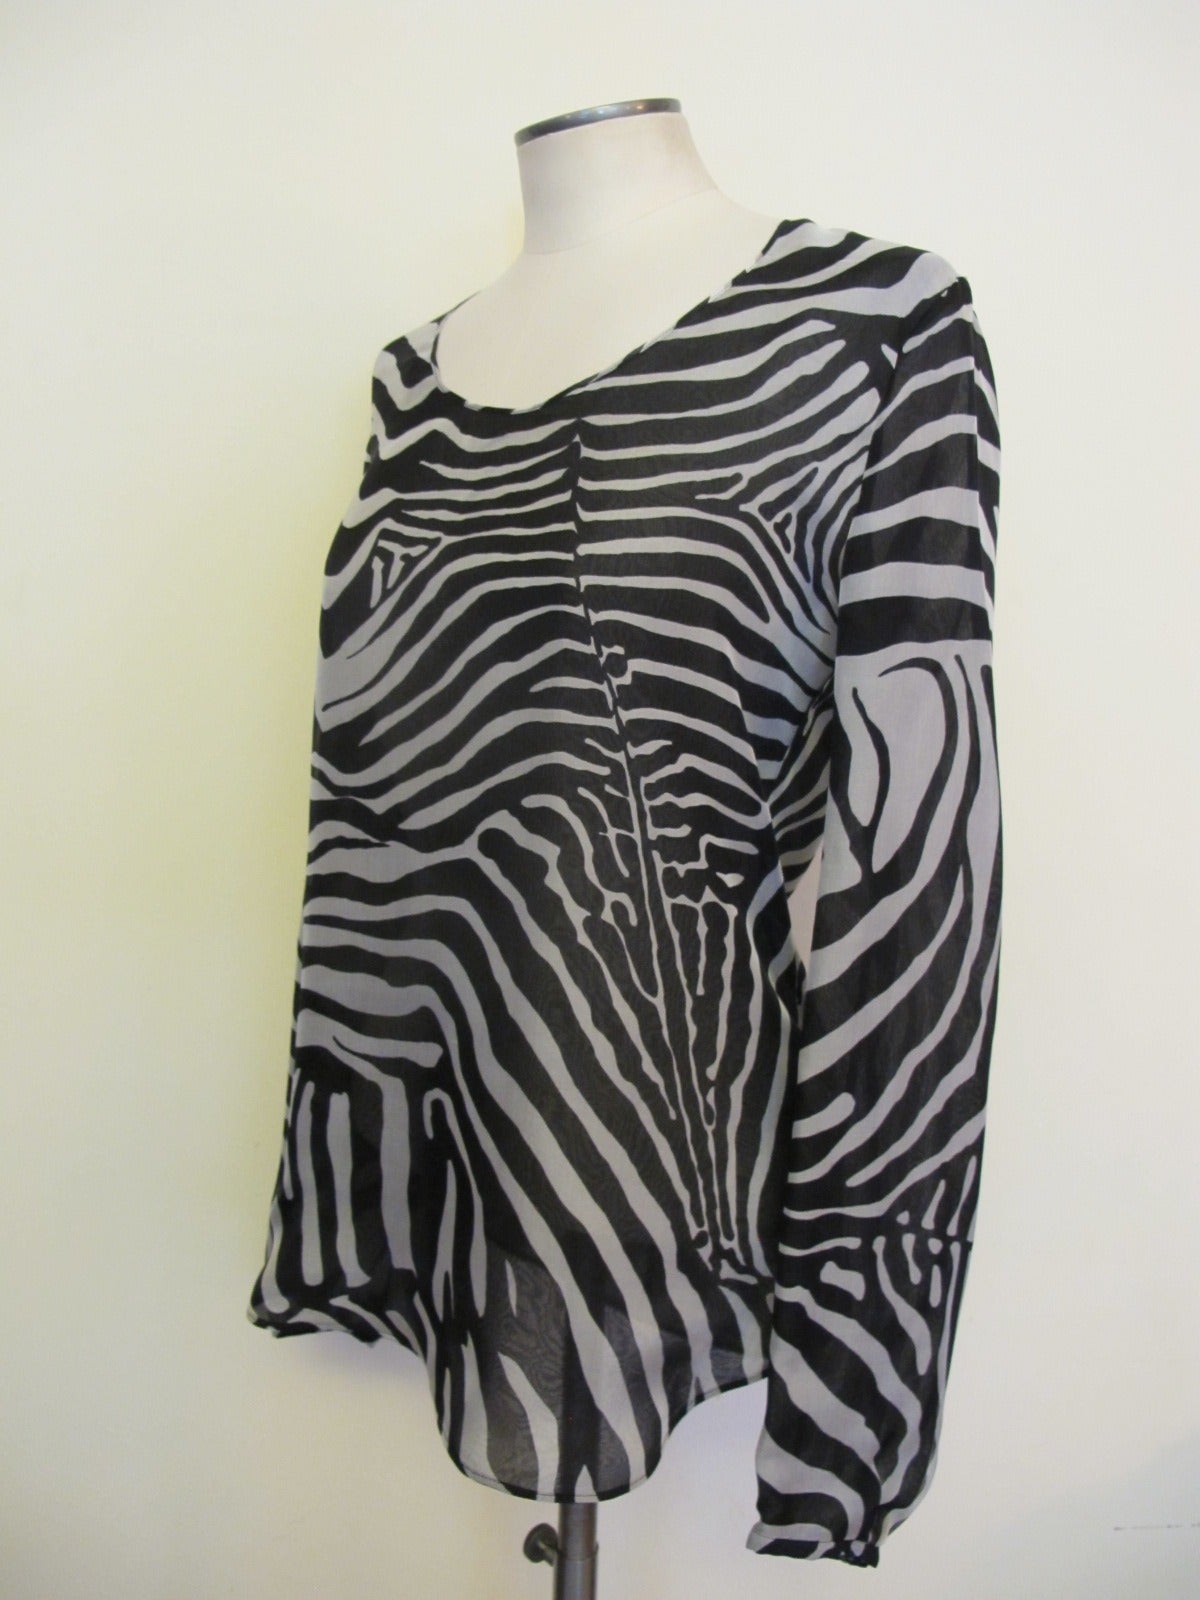 Chic Tom Ford Black and White Zebra Silk Blouse which is lined in silk.